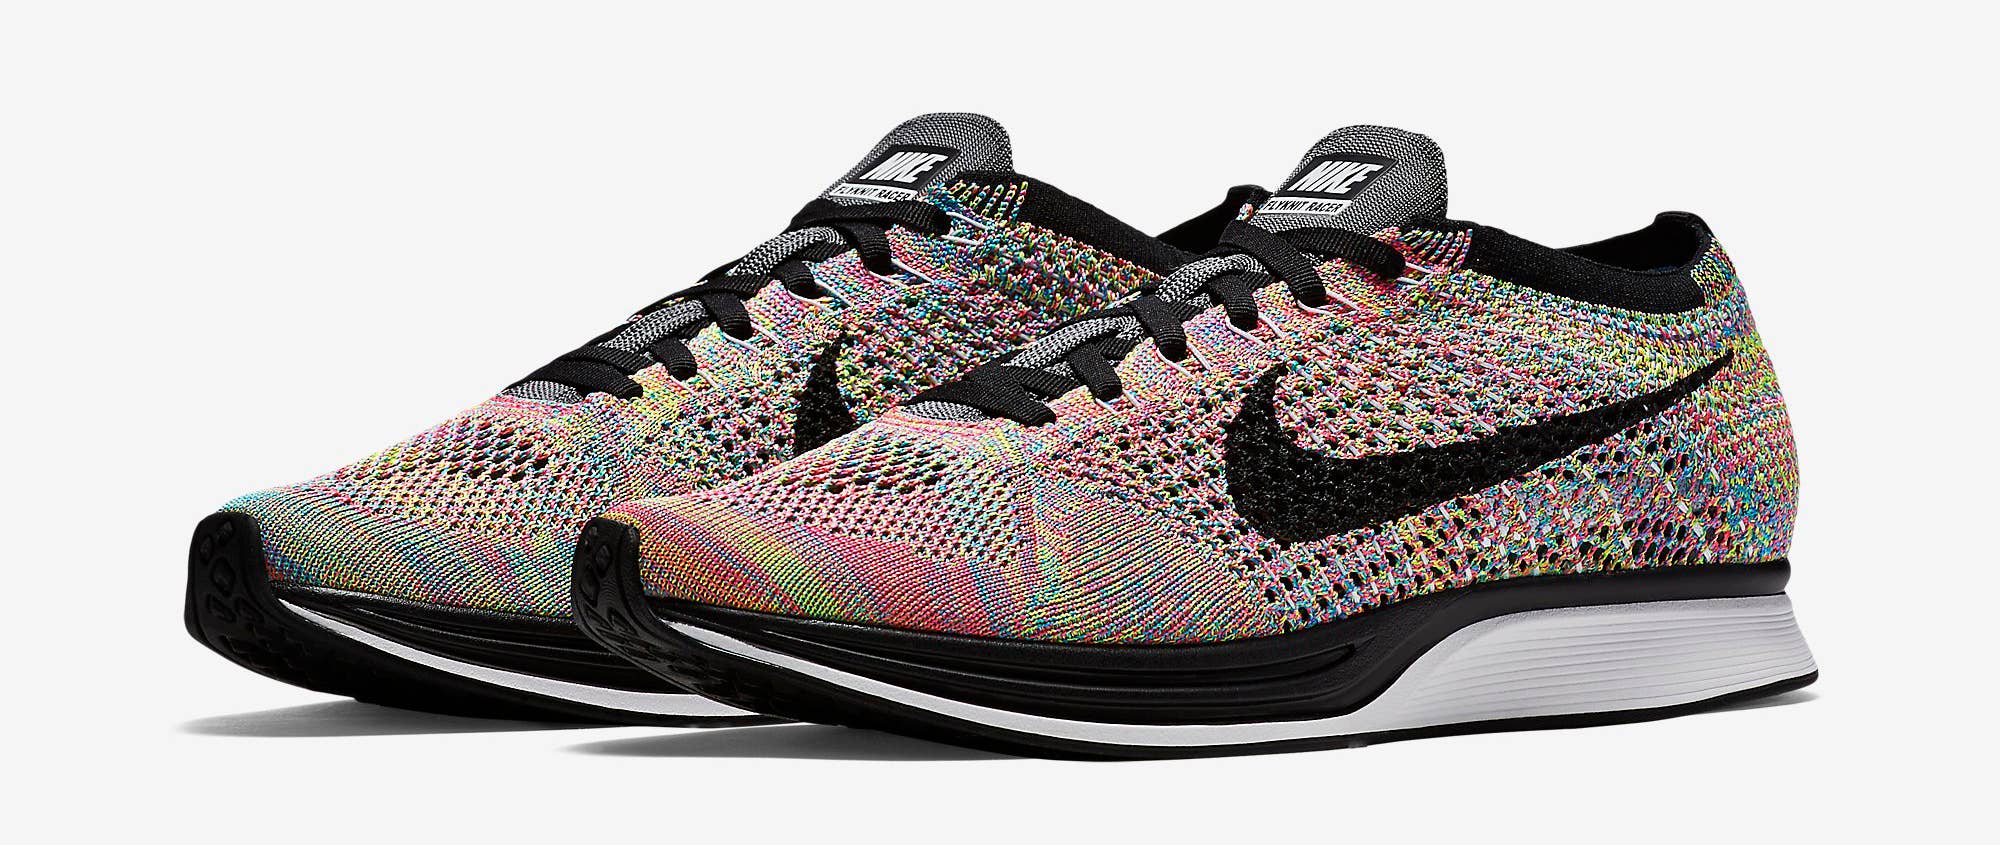 Yes, This Year's Flyknit Racers Grey Tongues | Complex